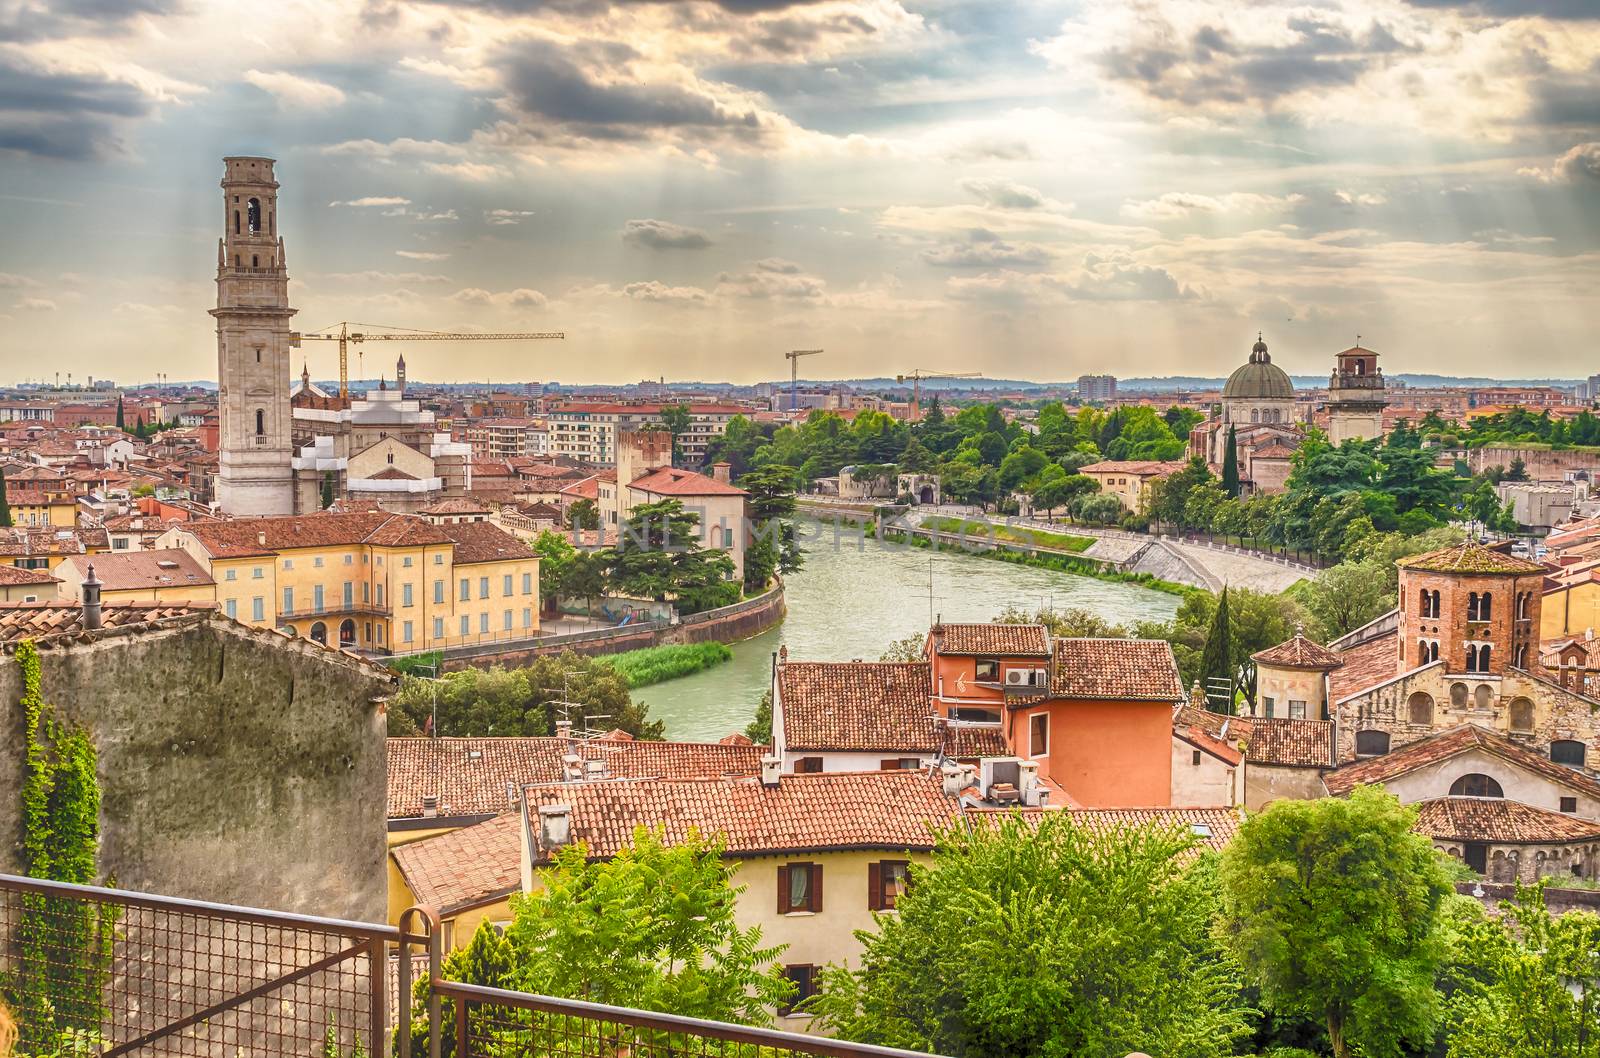 Panoramic View Over central Verona and the Adige River, Italy